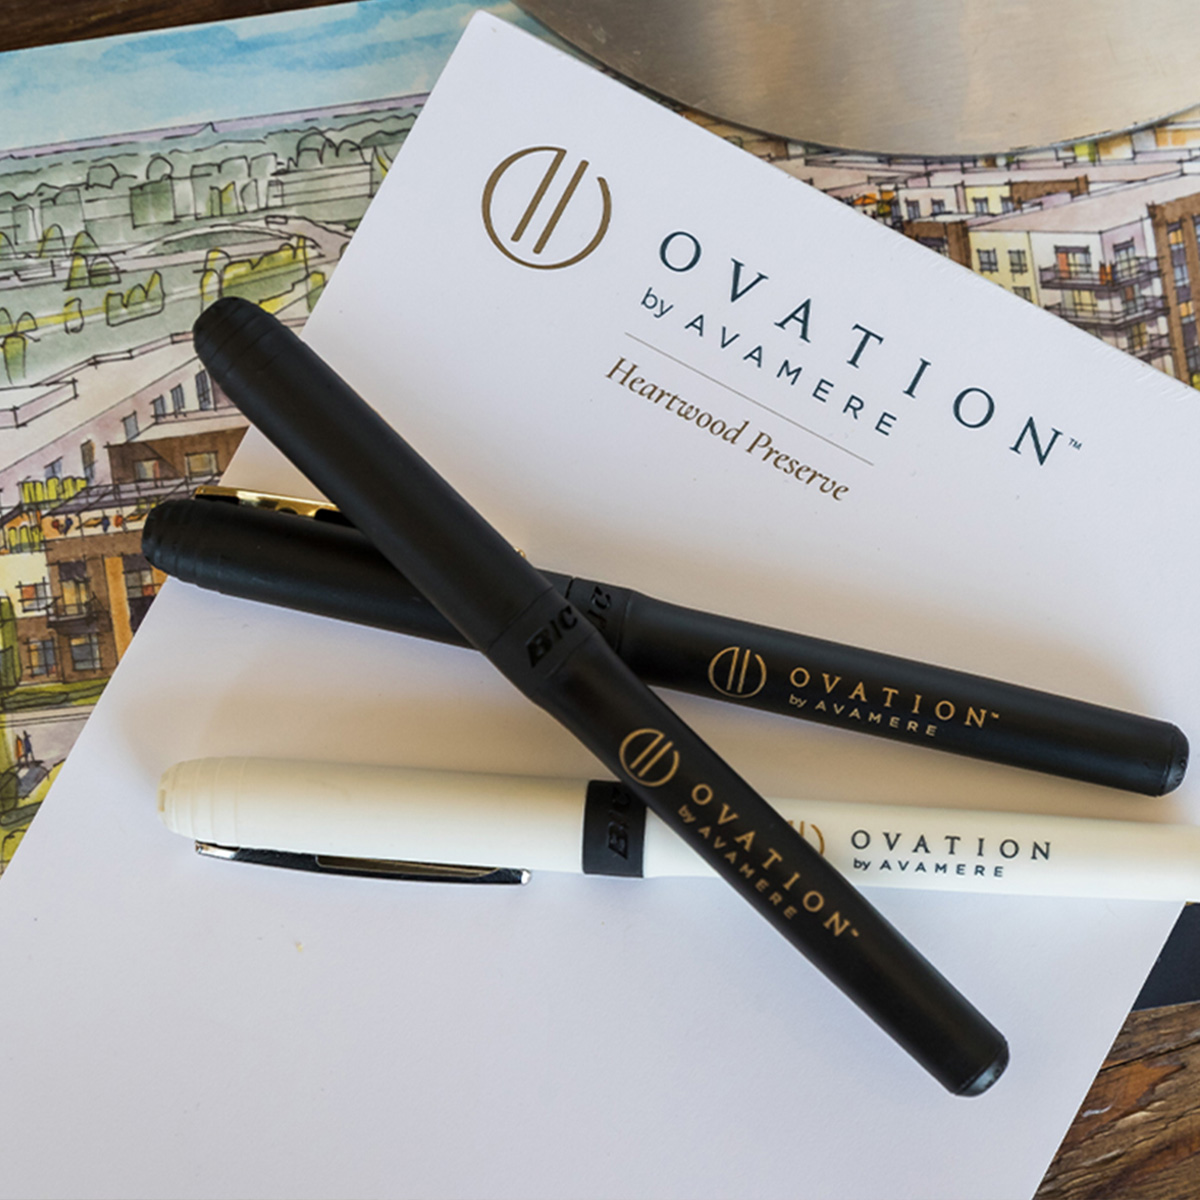 Ovation-branded stationary and pens